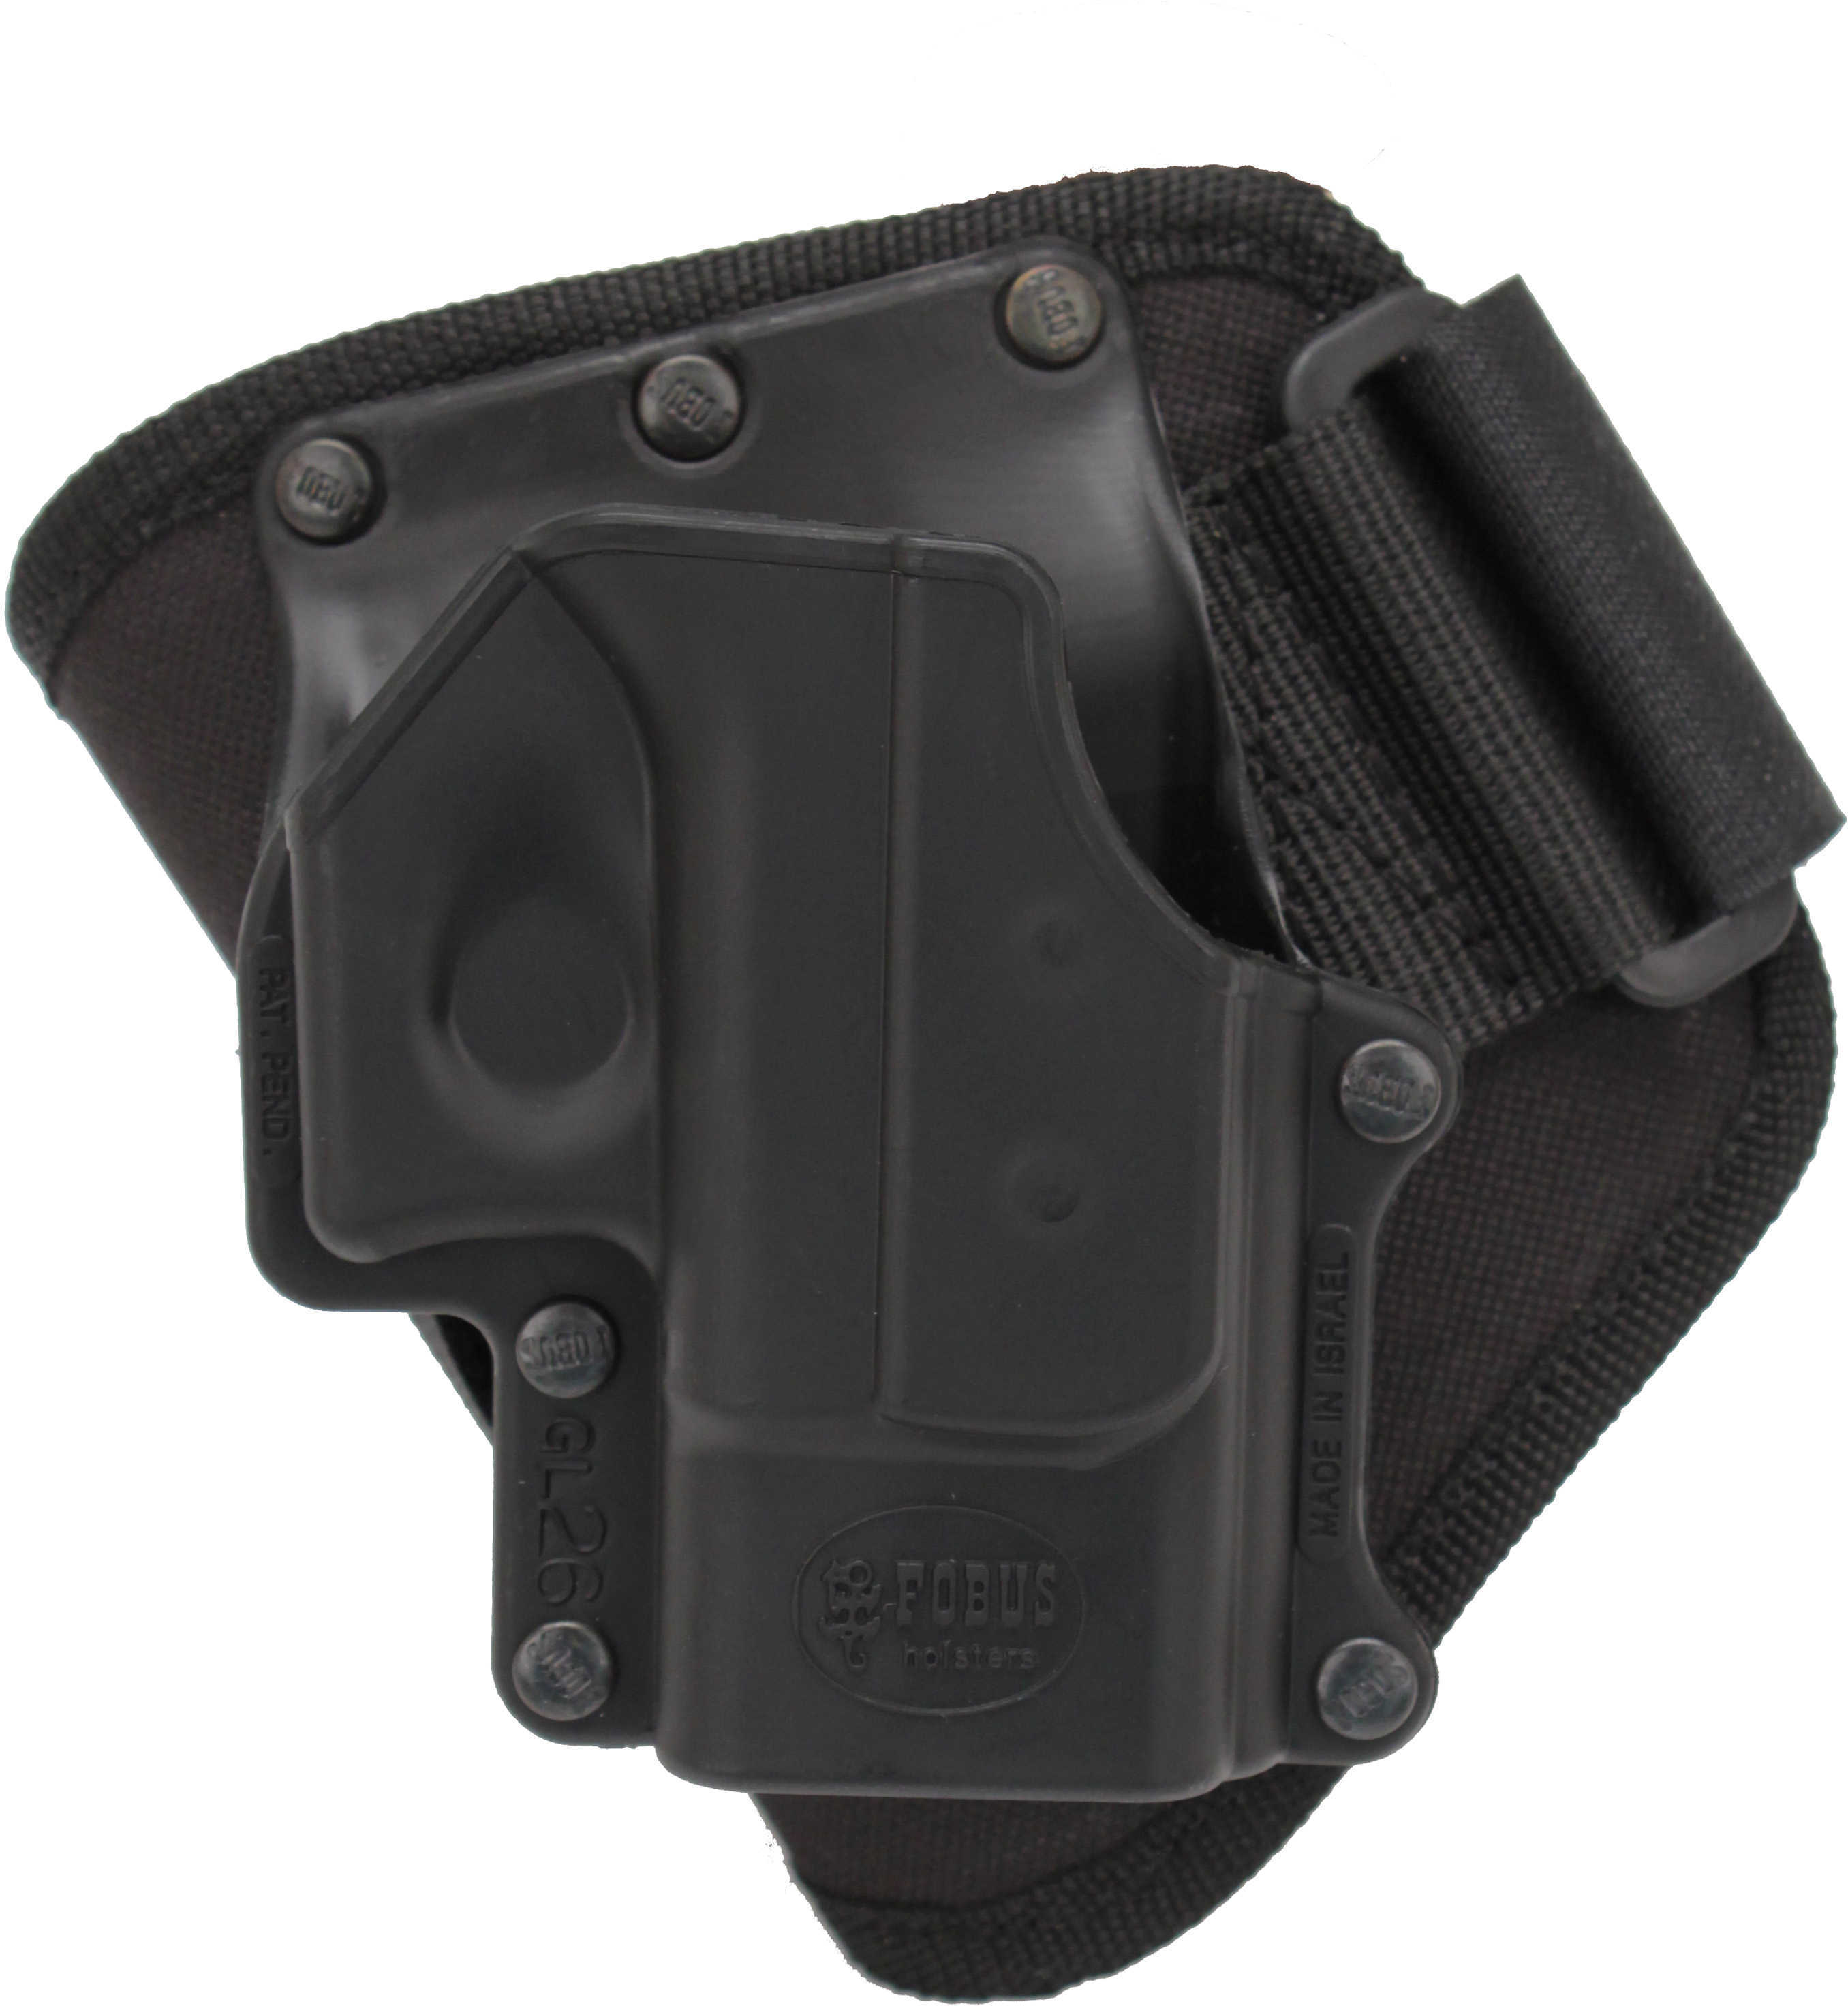 Fobus for Glock 26/27/33 Ankle GL26A